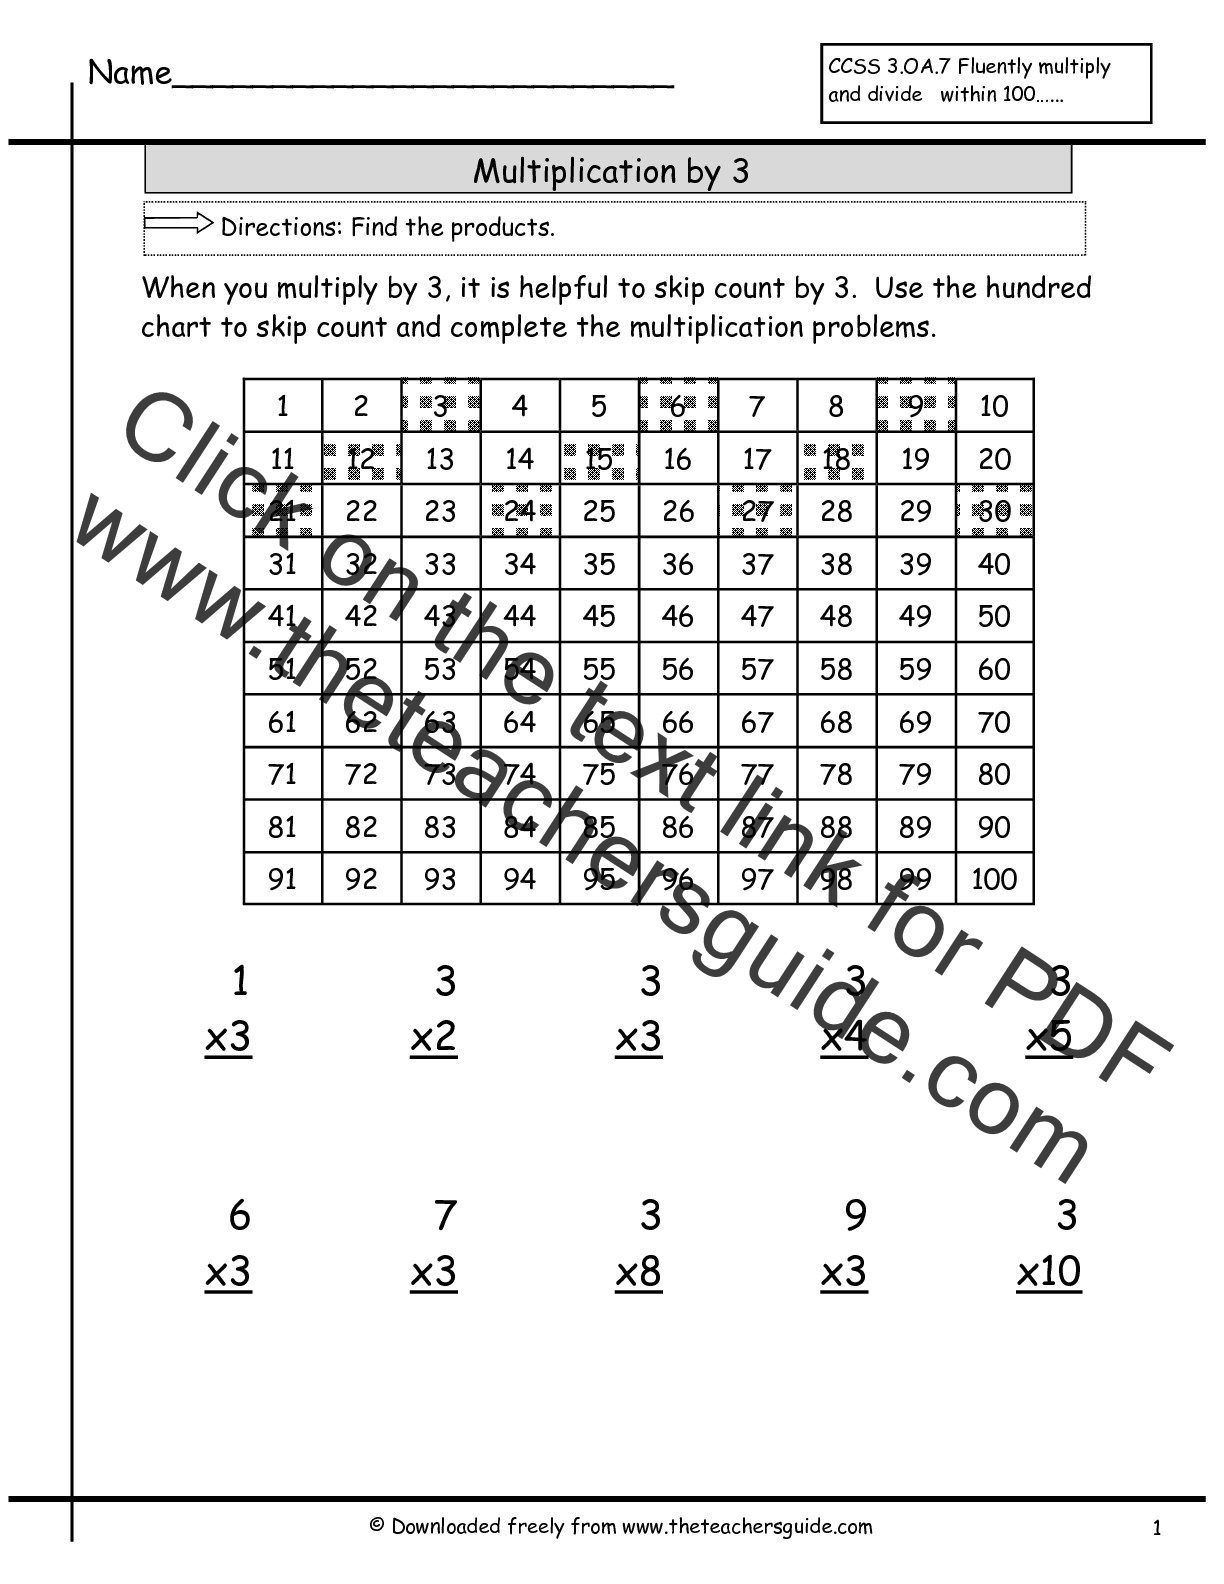 worksheet-on-10-times-table-printable-multiplication-table-10-times-table